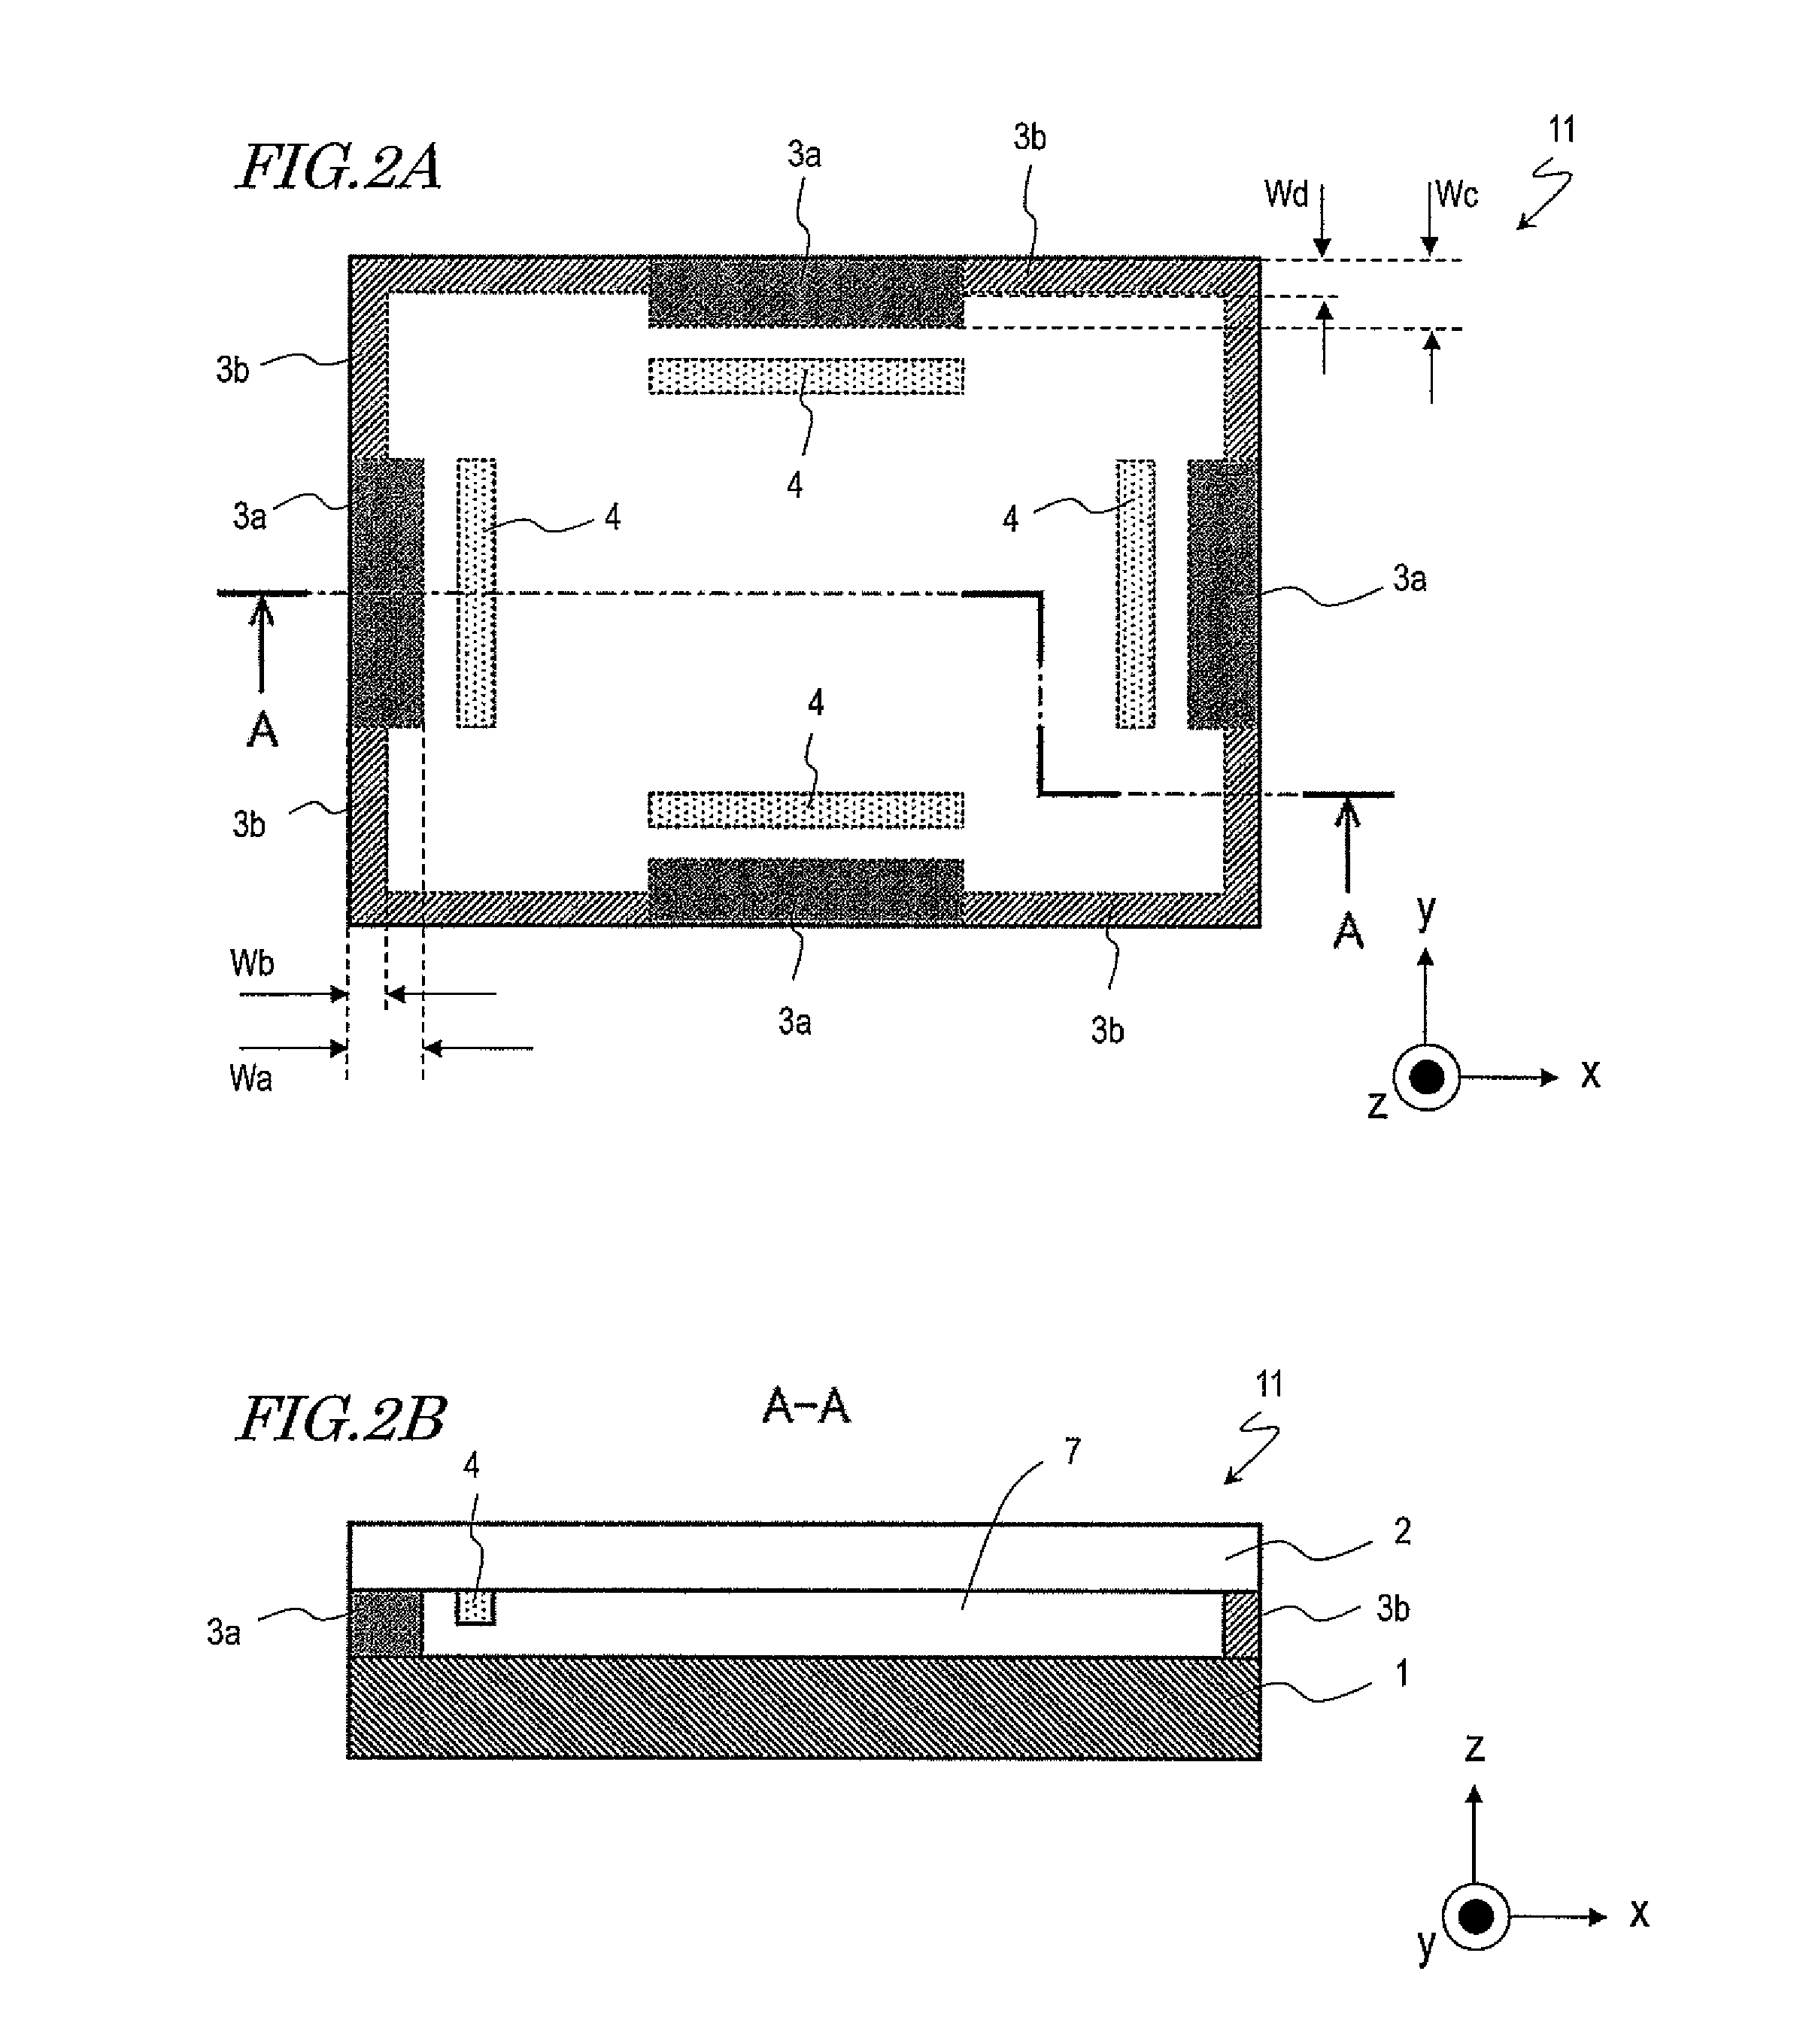 Electronic device having touch screen panel, vibration mechanisms, and peripheral support structures having different rigidities